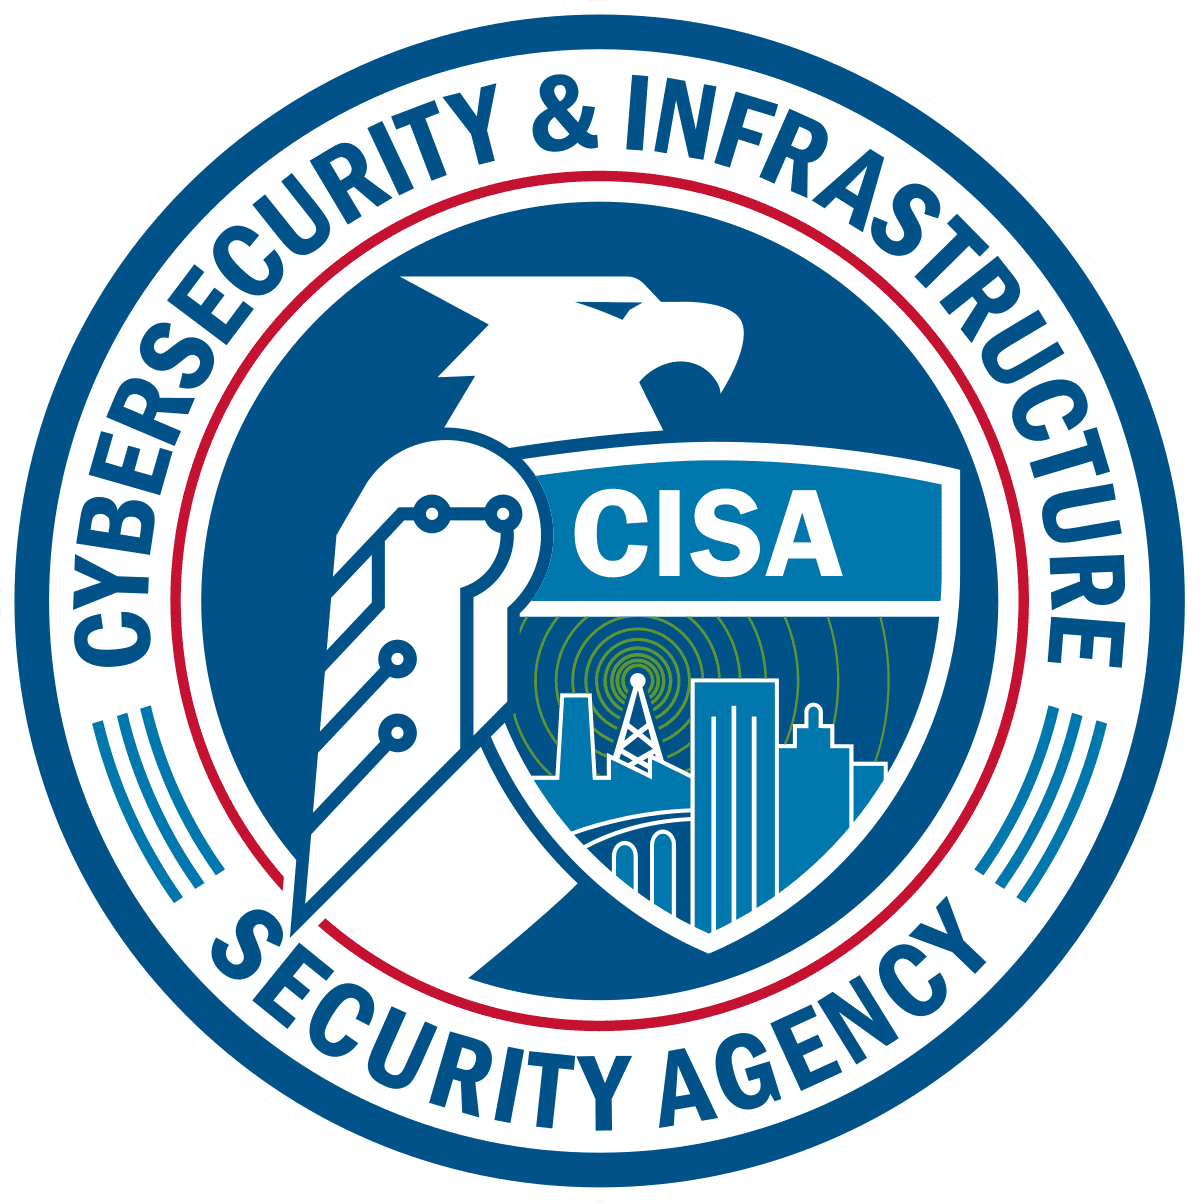 CyberSecurity & Infrastructure